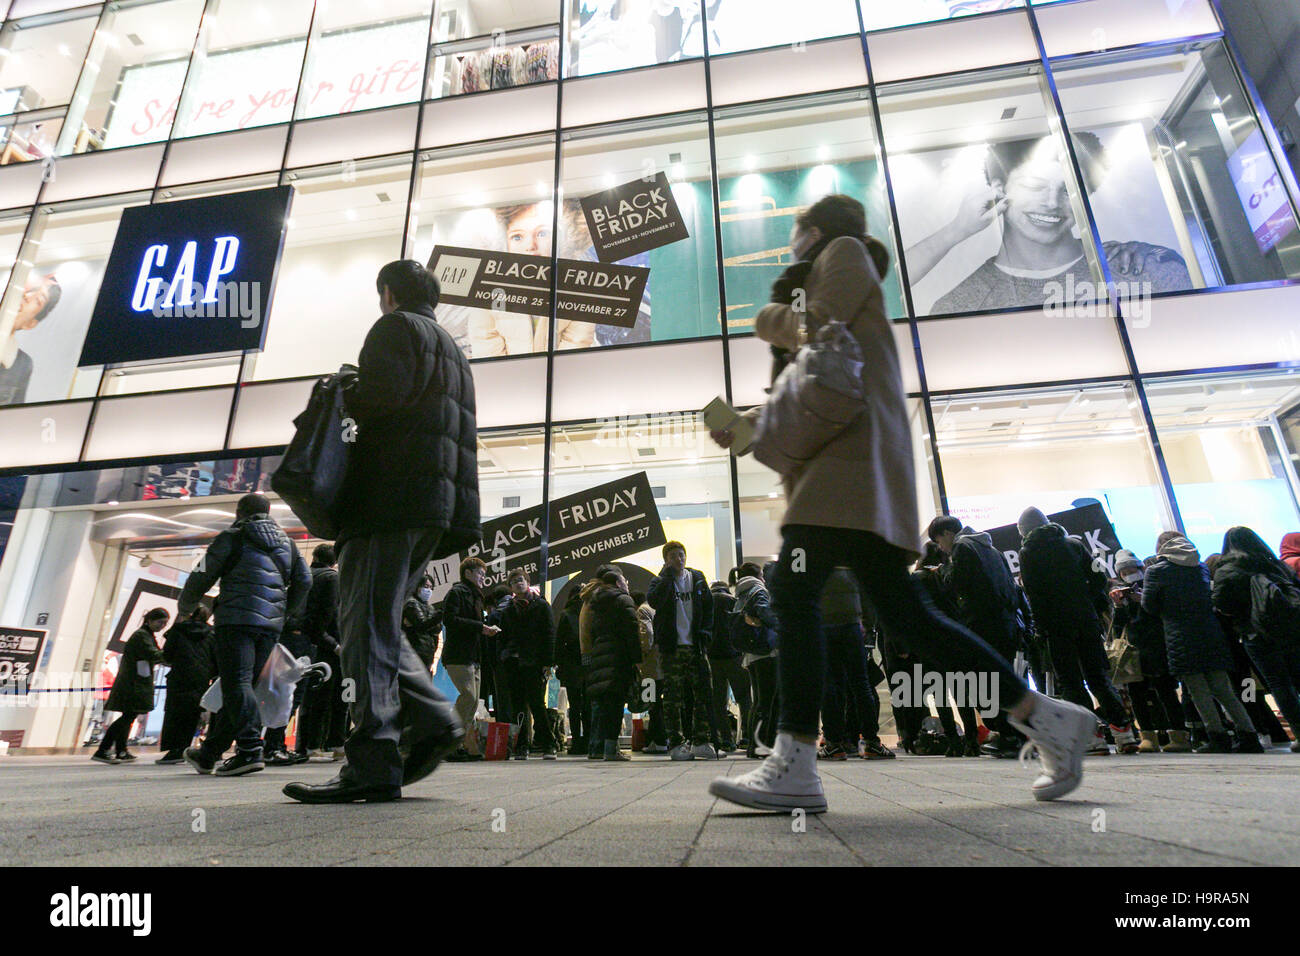 Tokyo, Japan. 25th Nov, 2016. Shoppers queue outside the Gap store in  Harajuku for Black Friday offers on November 24, 2016, Tokyo, Japan.  American brand GAP is promoting Black Friday in Tokyo